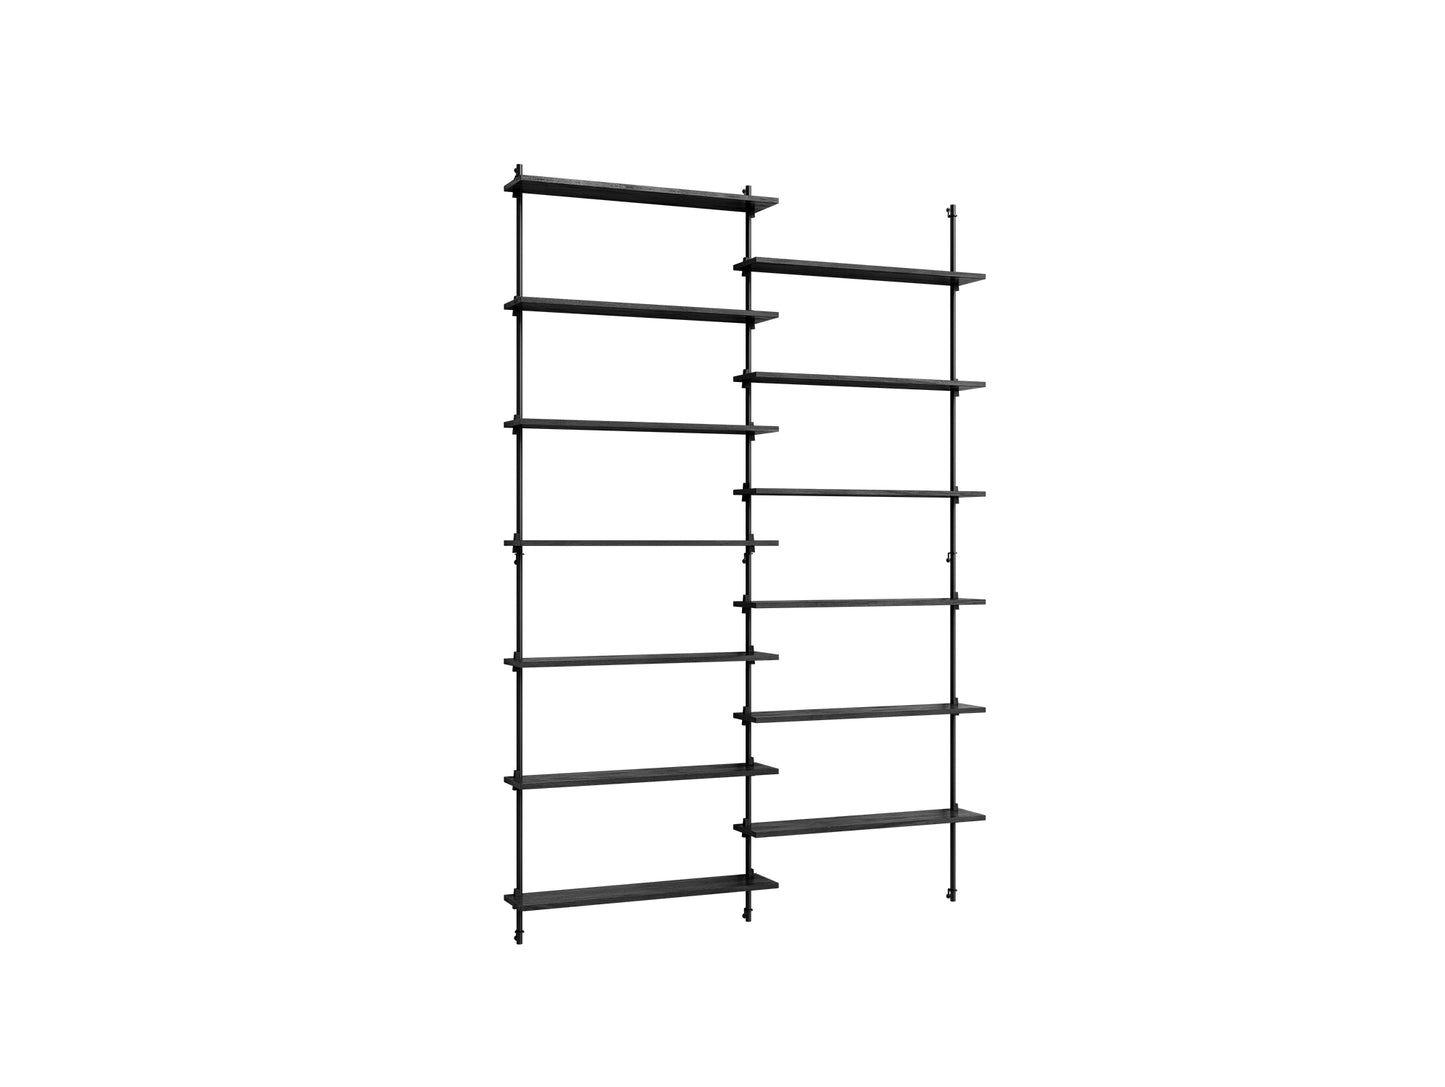 Wall Shelving System Sets (230 cm) by Moebe - WS.230.2 / Black Uprights / Black Painted Oak